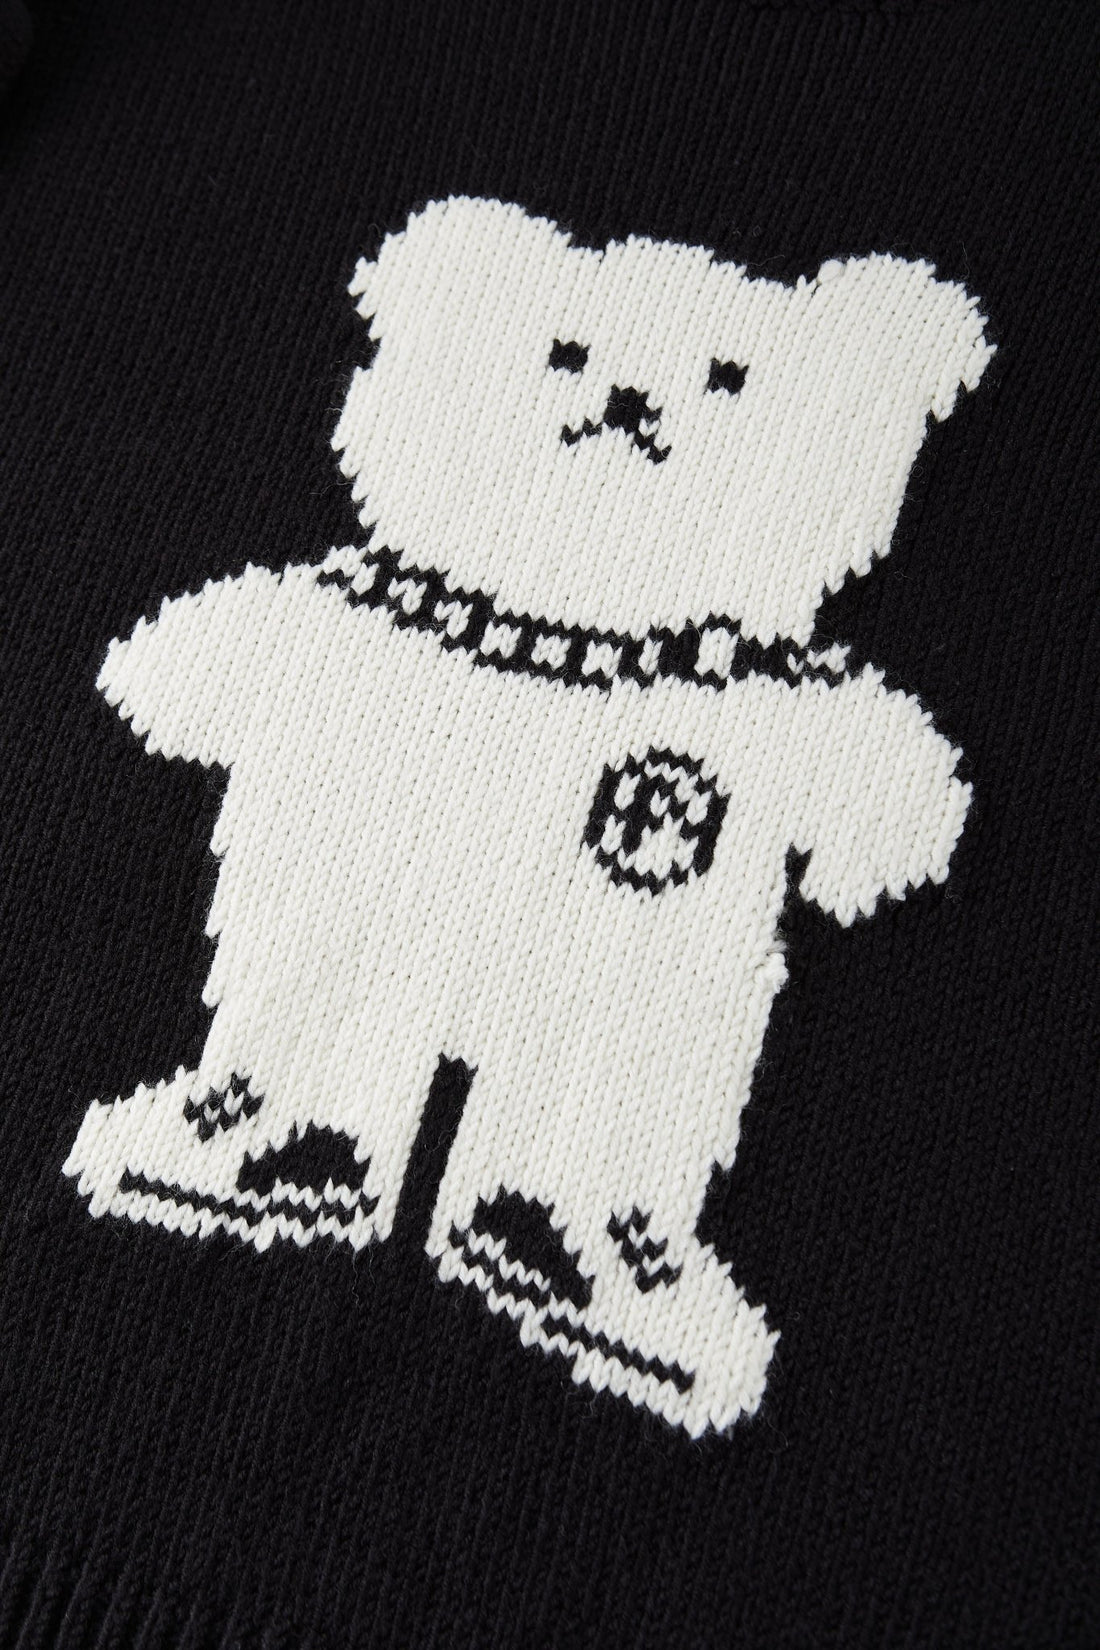 SKETCHY BEAR SWEATER BLACK Acupuncture